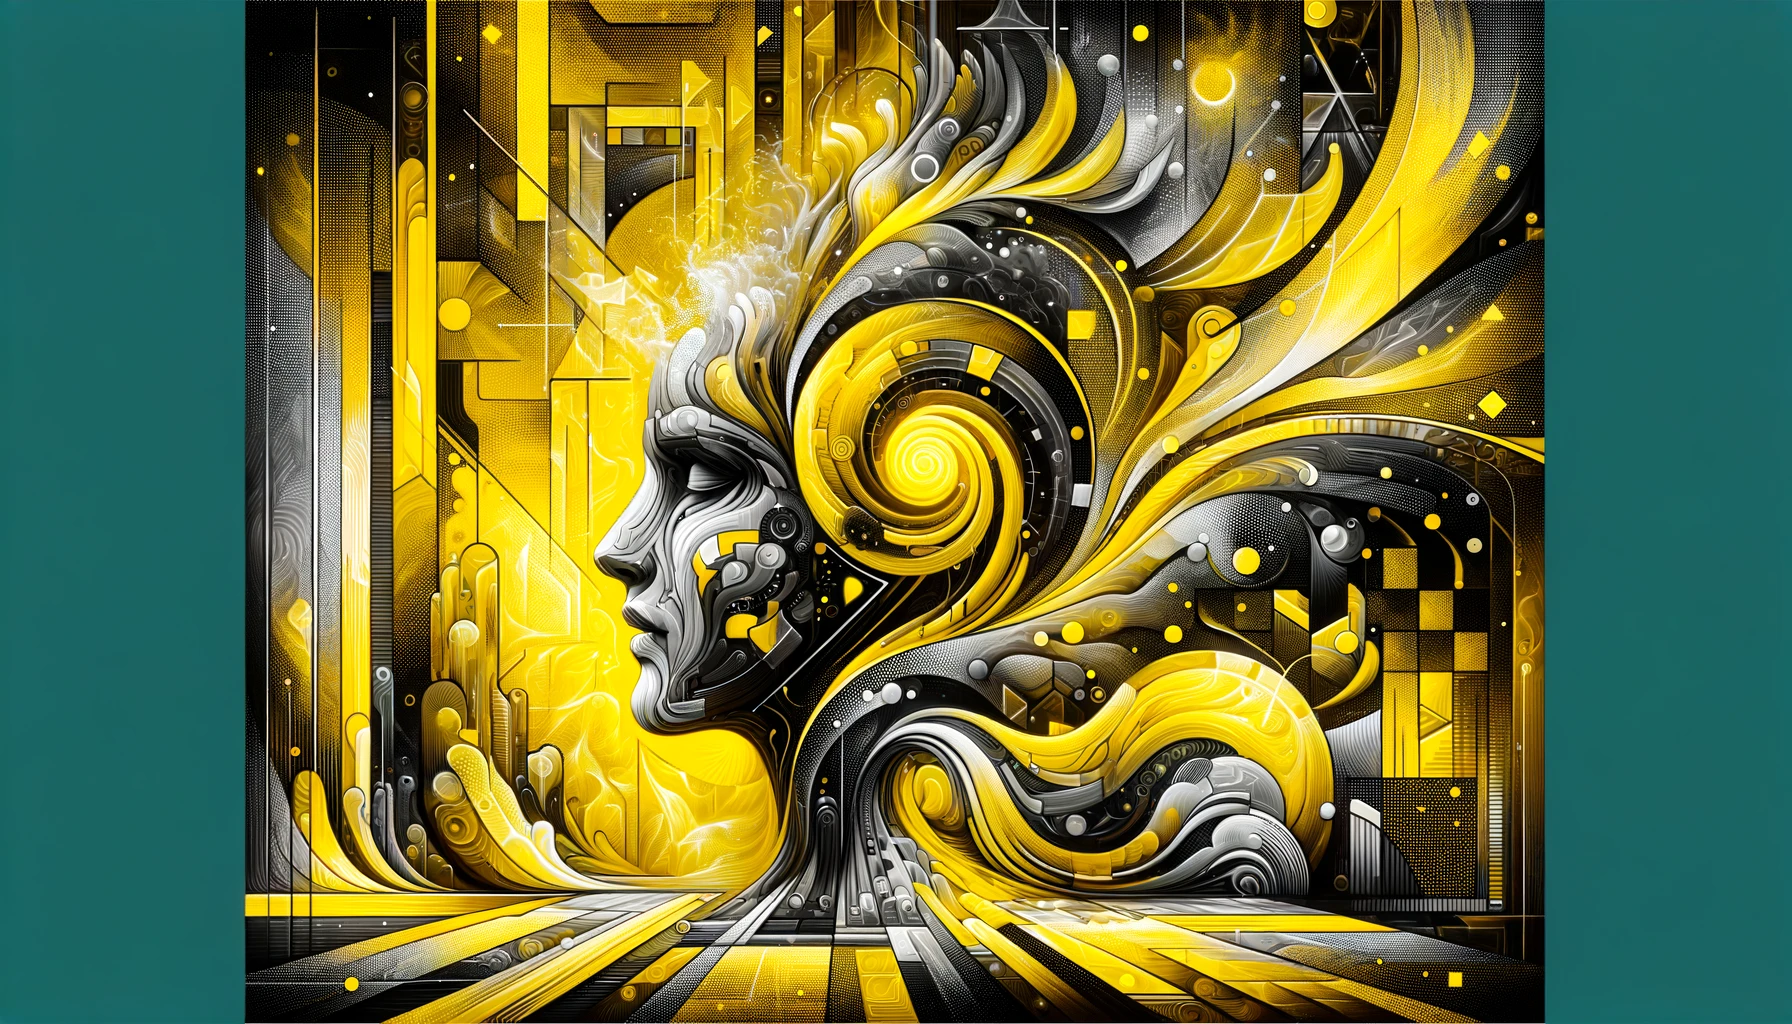 DALL-E-2024-01-19-23.02.30---A-hyper-stylized-artistic-representation-with-a-dominant-yellow-color-theme--blending-abstract-art-and-futuristic-concepts.-The-image-is-filled-with-e